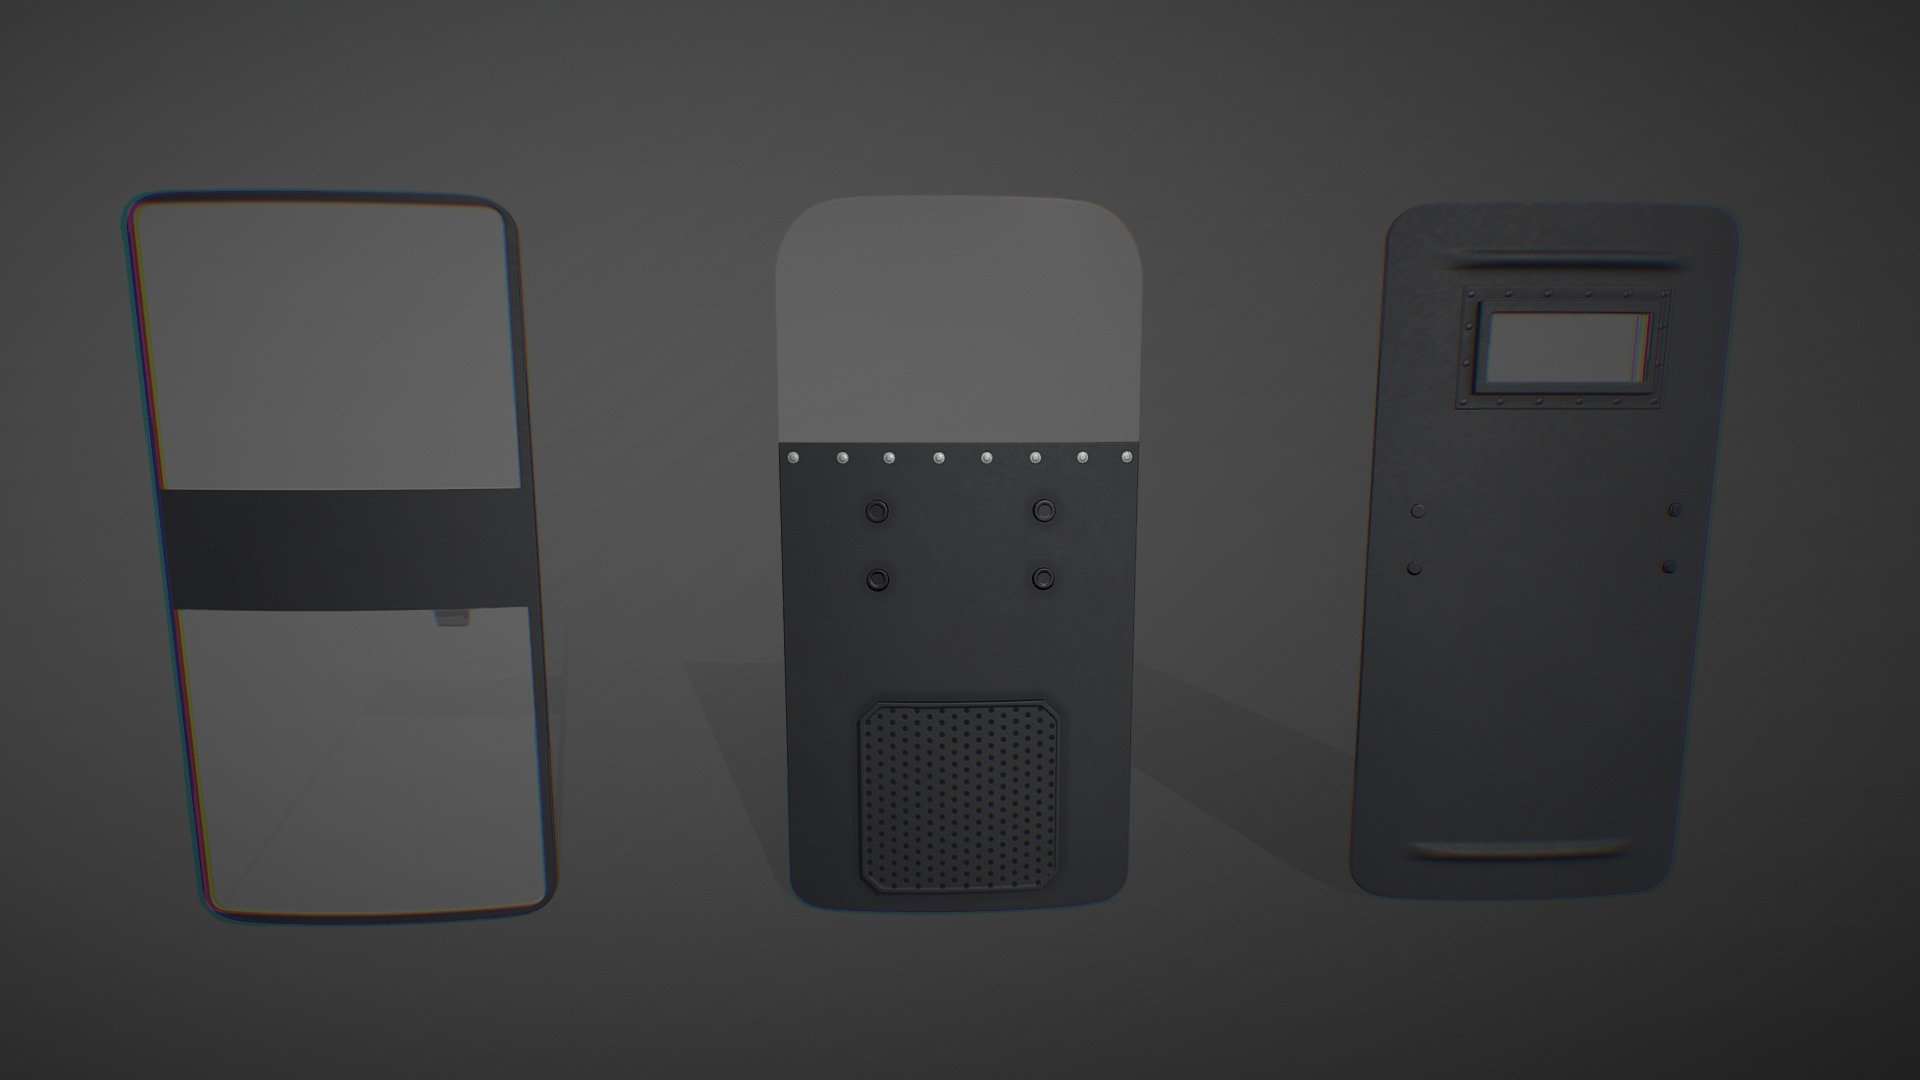 3 diffrent types of riot control shields.

all use the same texture maps and material 3d model